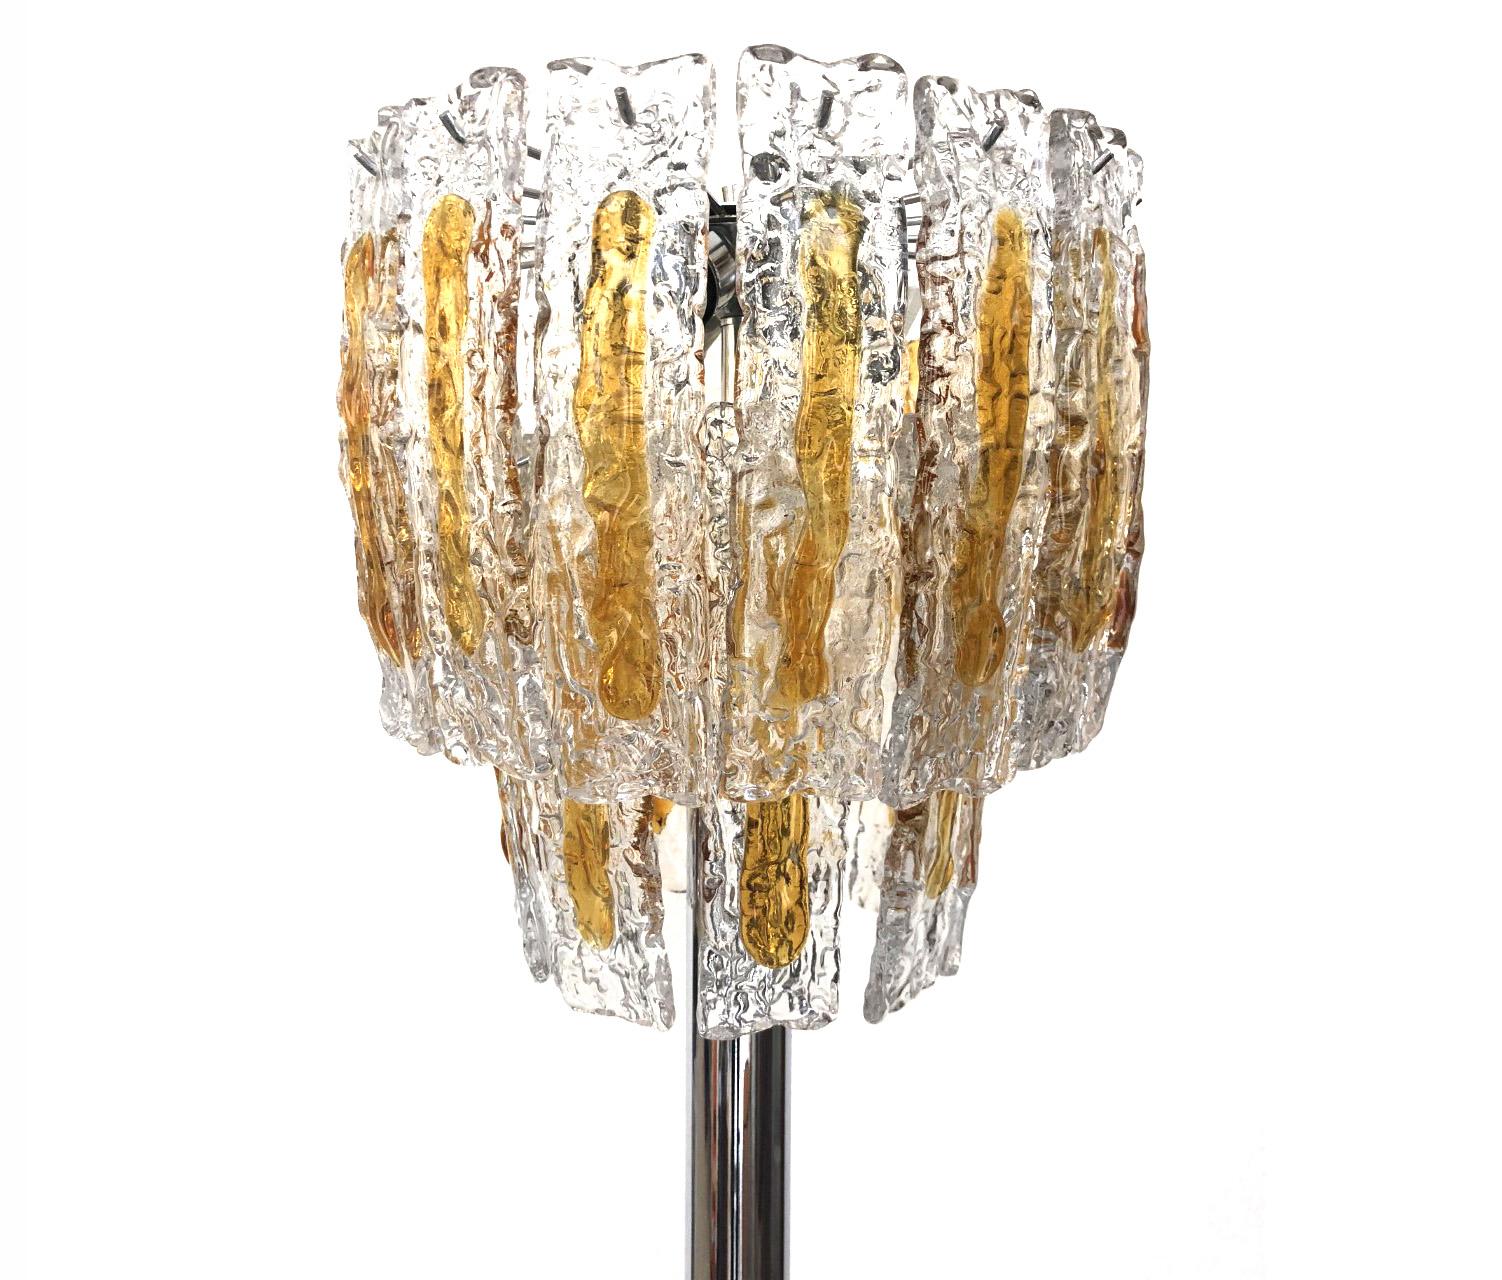 Glamorous and beautiful Italian Murano glass midcentury floor lamp. This floor lamp was designed and manufactured during the 1970s in Italy for the Venice company “Mazzega”.
This floor lamp is composed by 29 units of clear amber Murano glasses and